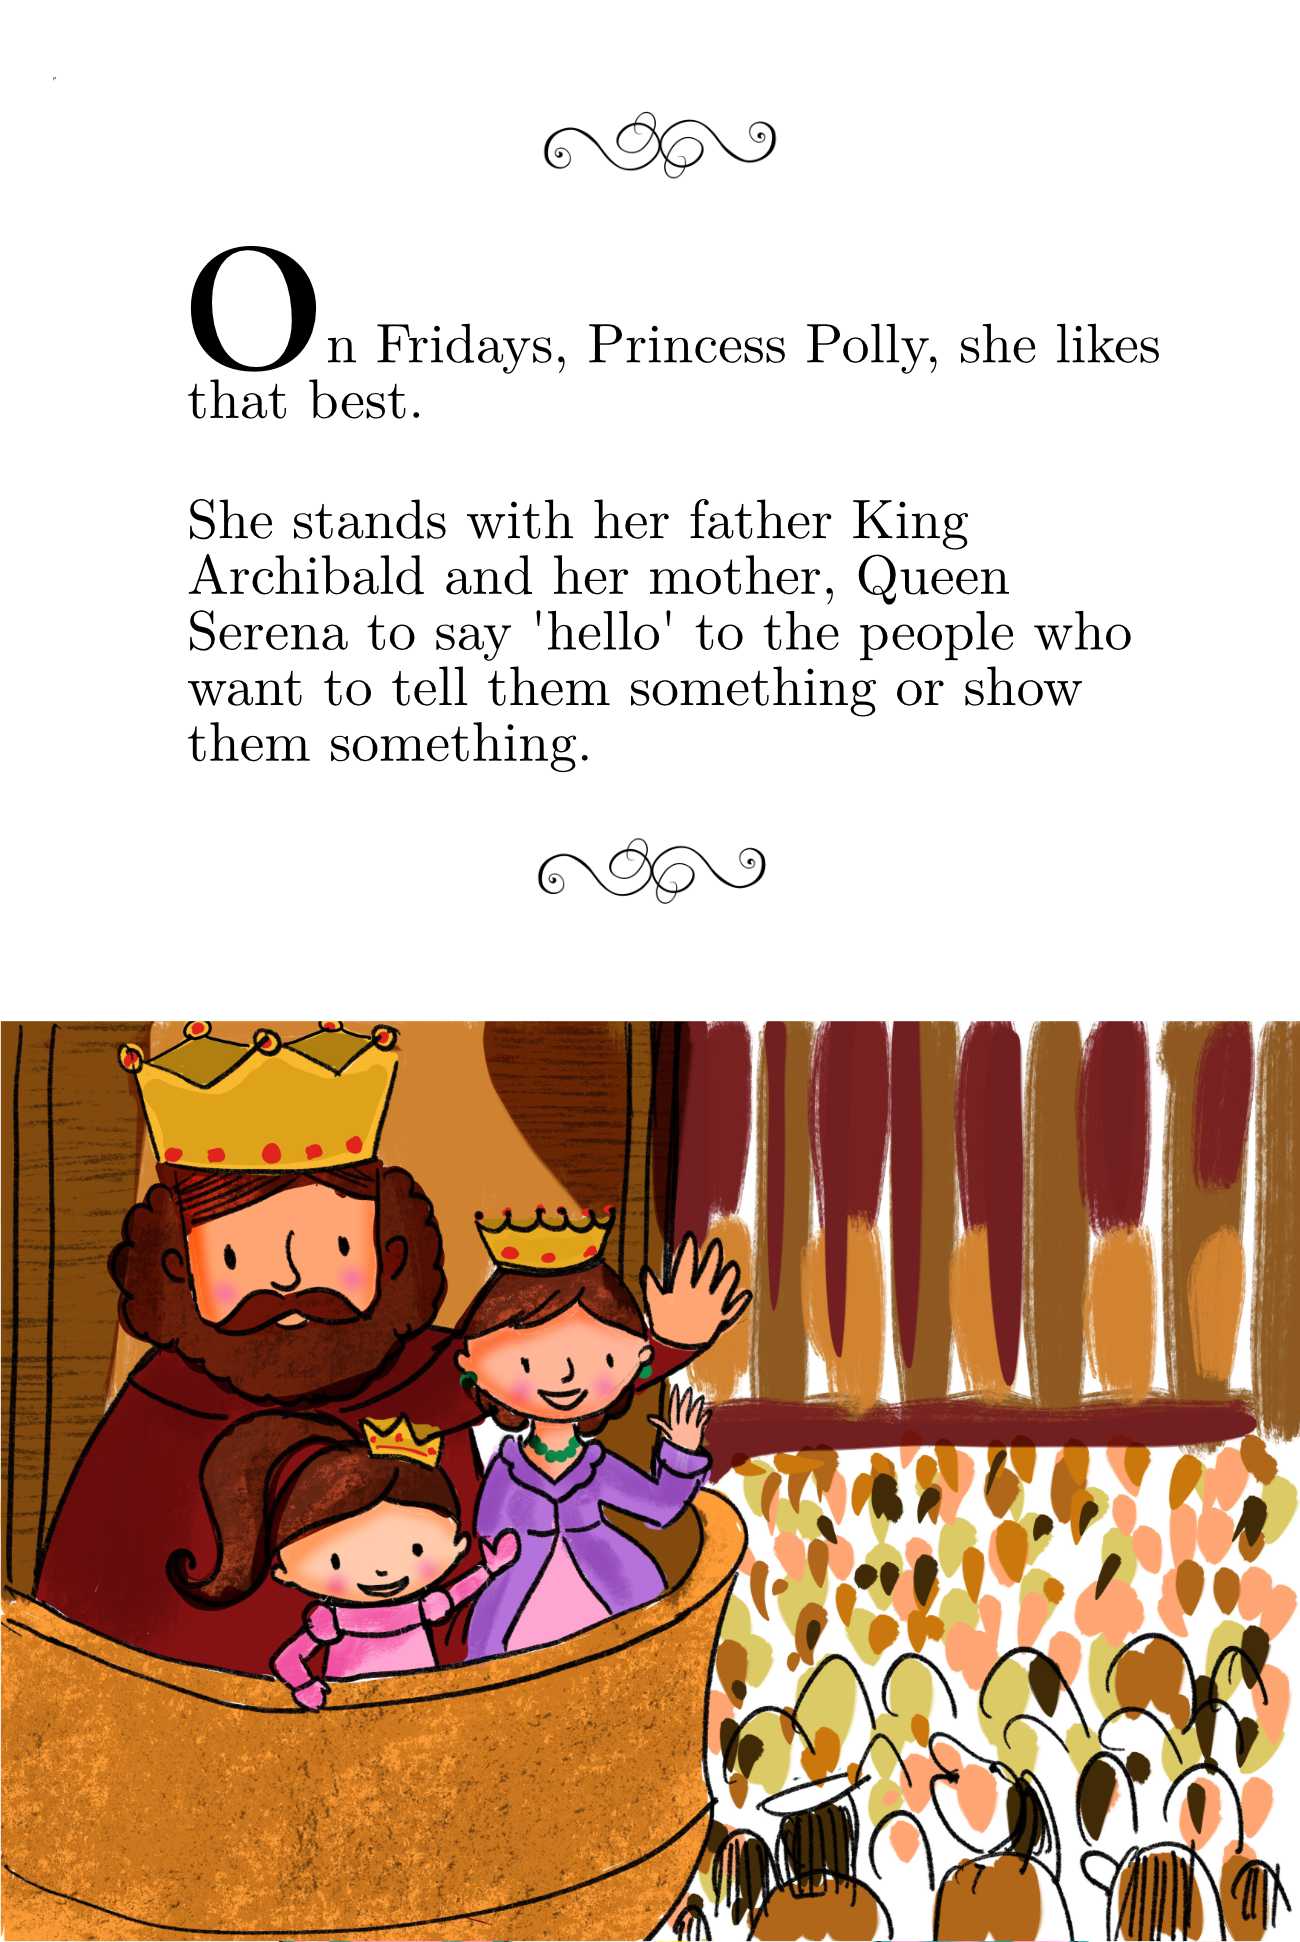 Bedtime Stories Polly Pirate Princess Short Stories for Kids page 3